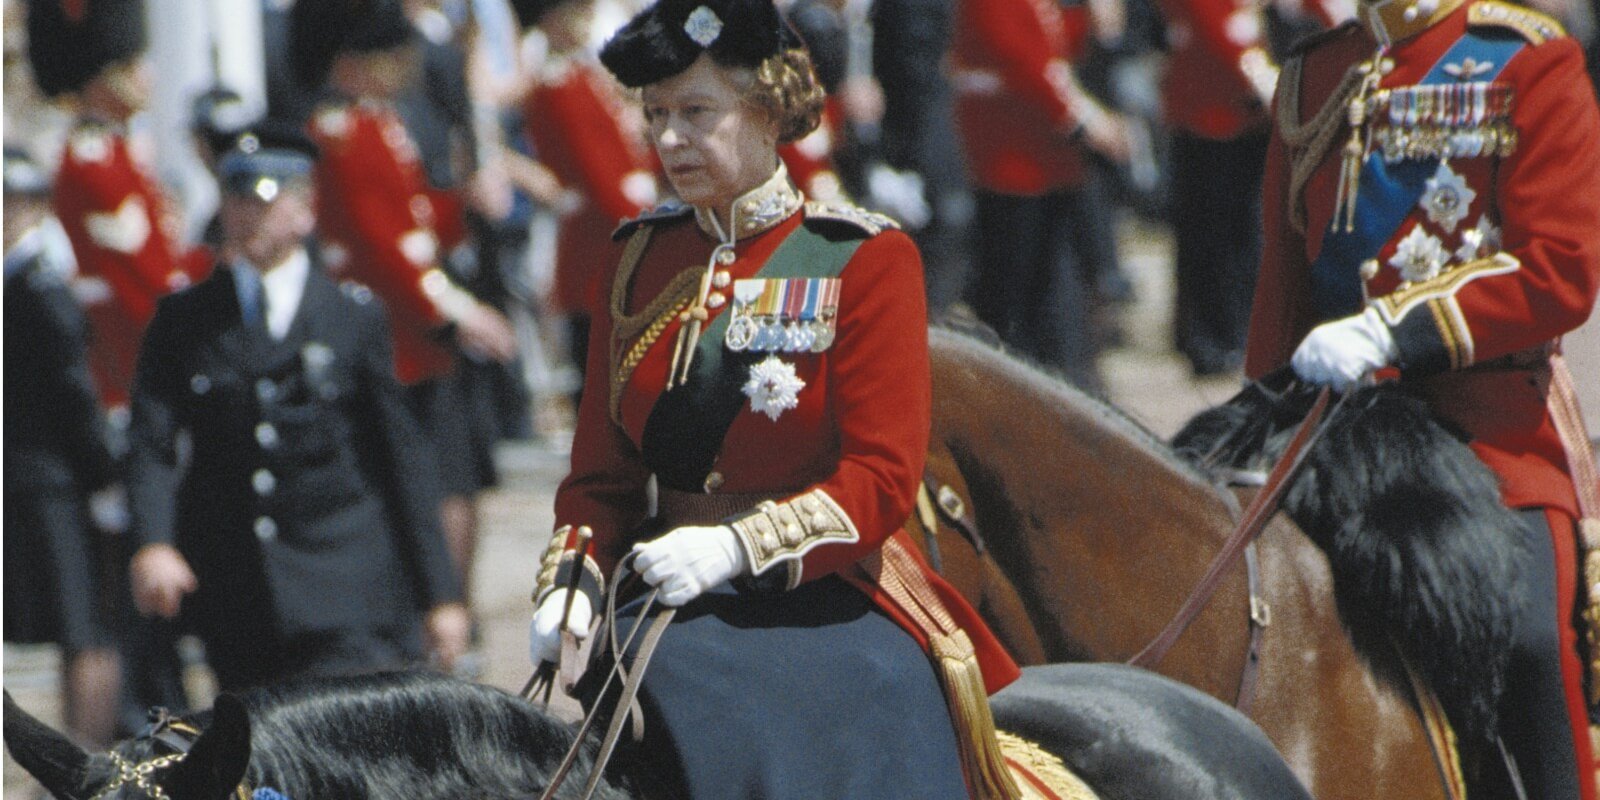 Queen Elizabeth rides sidesaddle during the 1986 Trooping the Color parade.